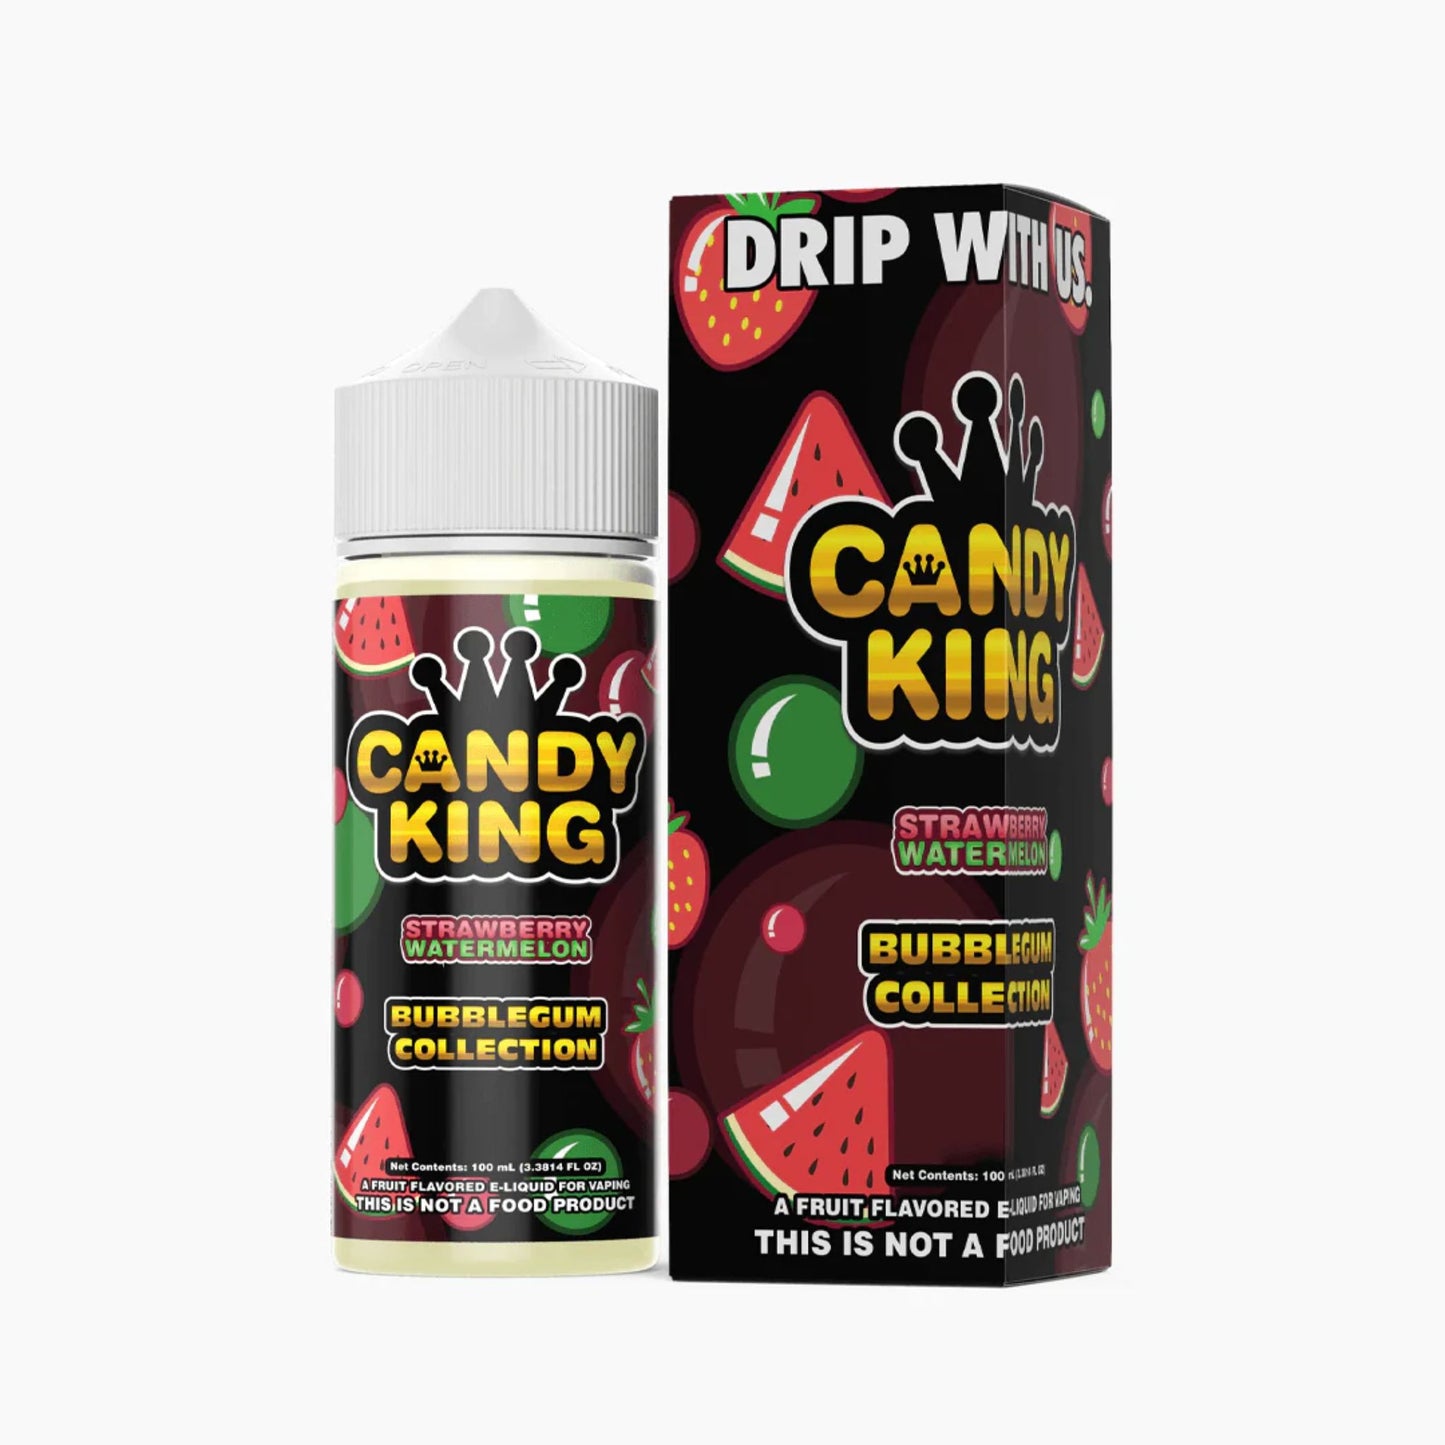 Candy King Bubblegum Collection | Strawberry Watermelon | 100ml bottle and box